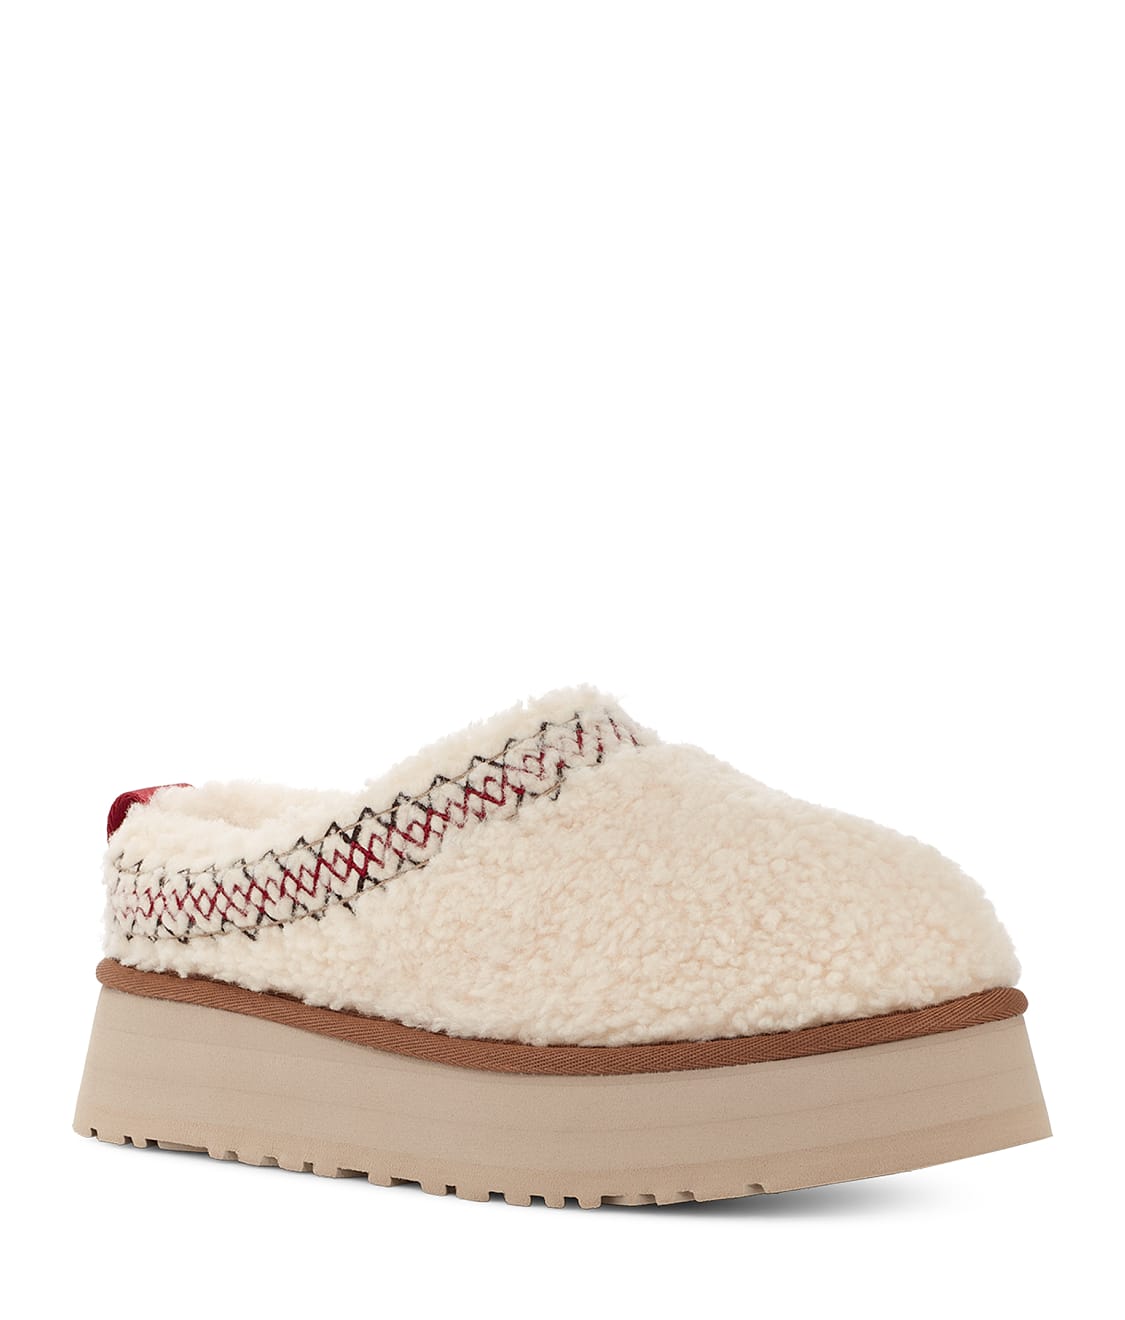 UGG Tazz Braid Slippers & Reviews | Bare Necessities (Style 1143976)